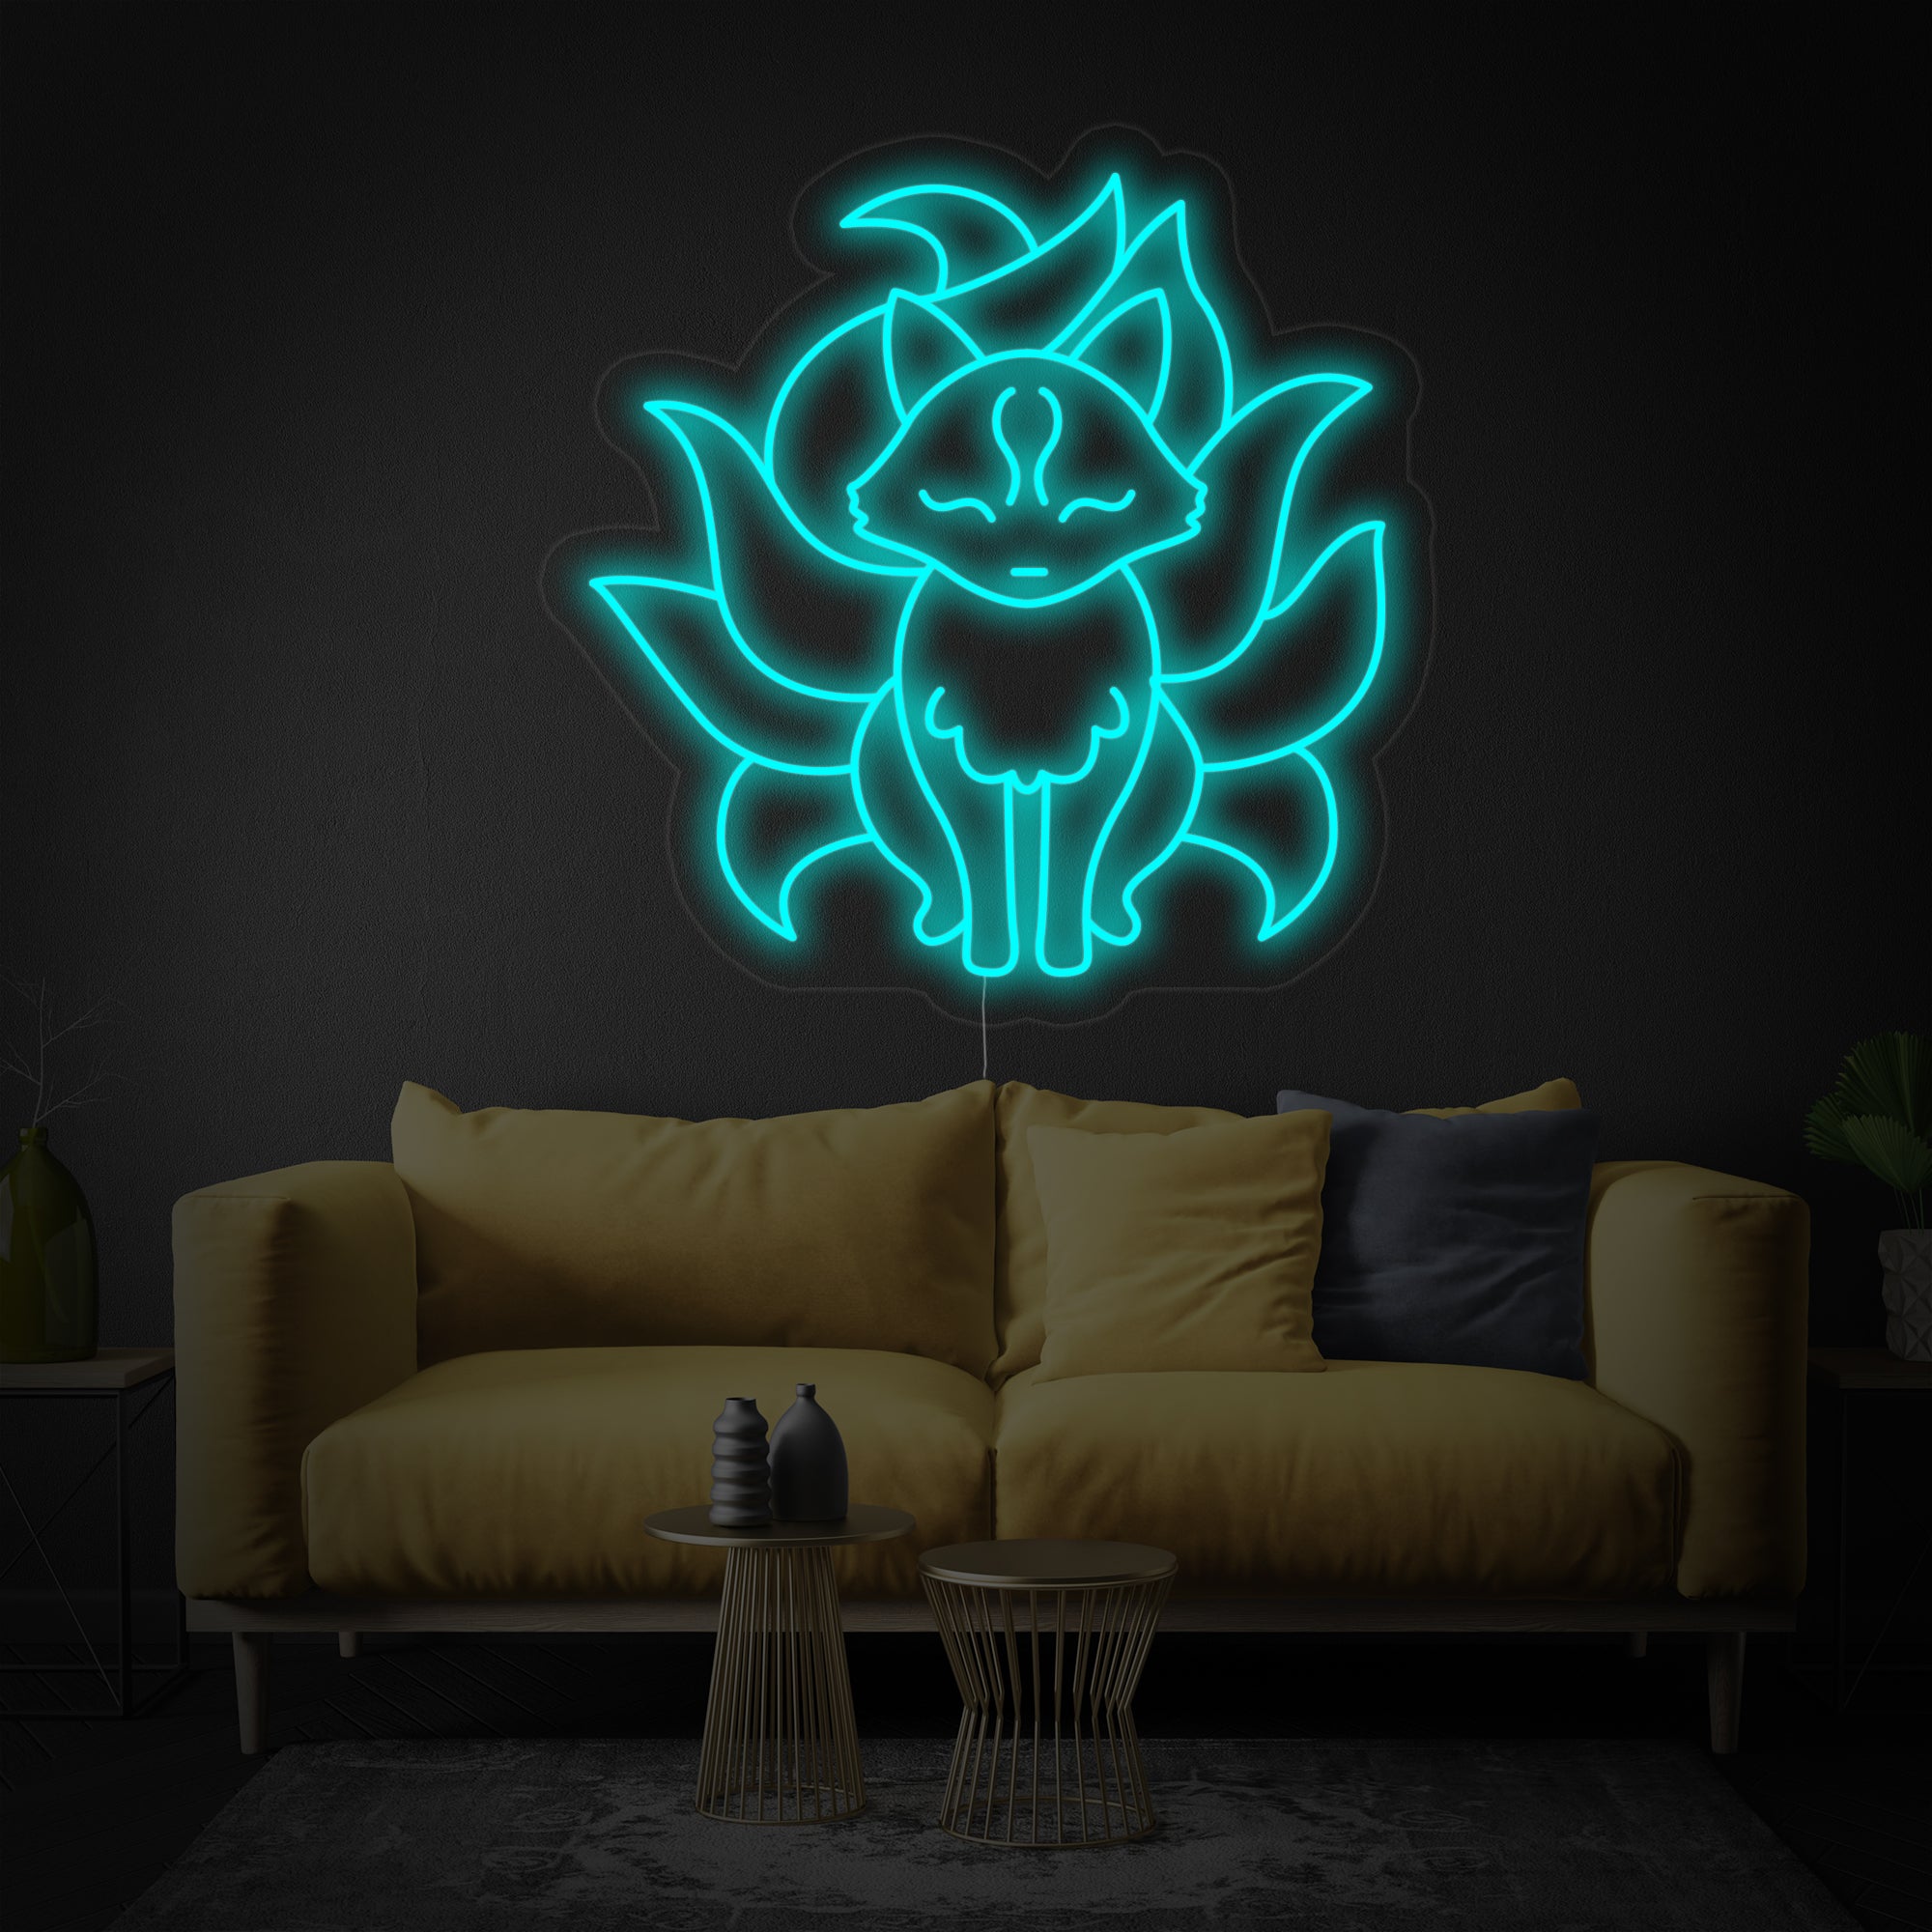 Buy Sailor Moon Neon Sign Online at the Best Price  Neon Attack